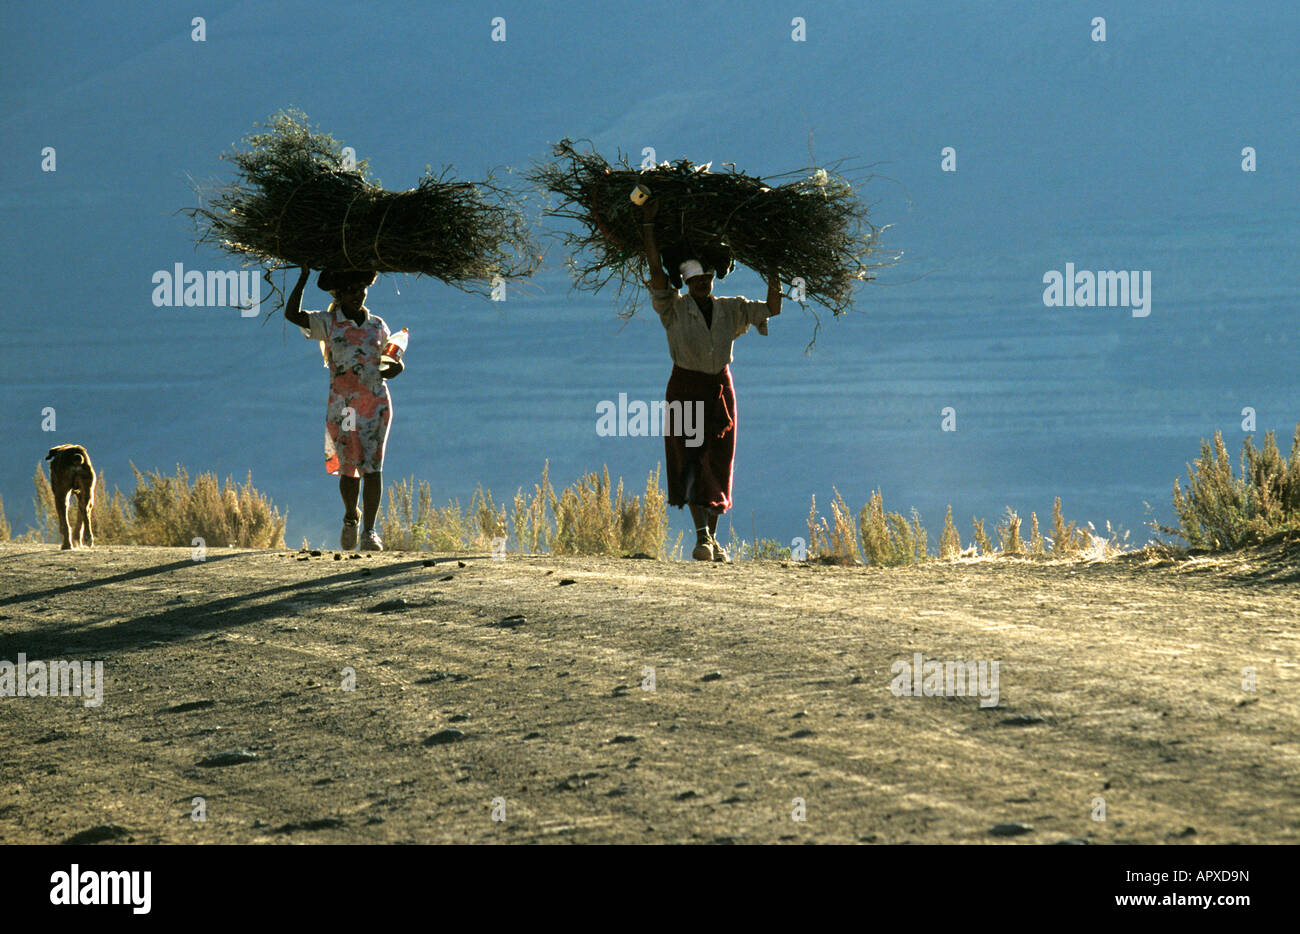 Two women accompanied by a dog walking on a dusty road carrying firewood on their heads Stock Photo